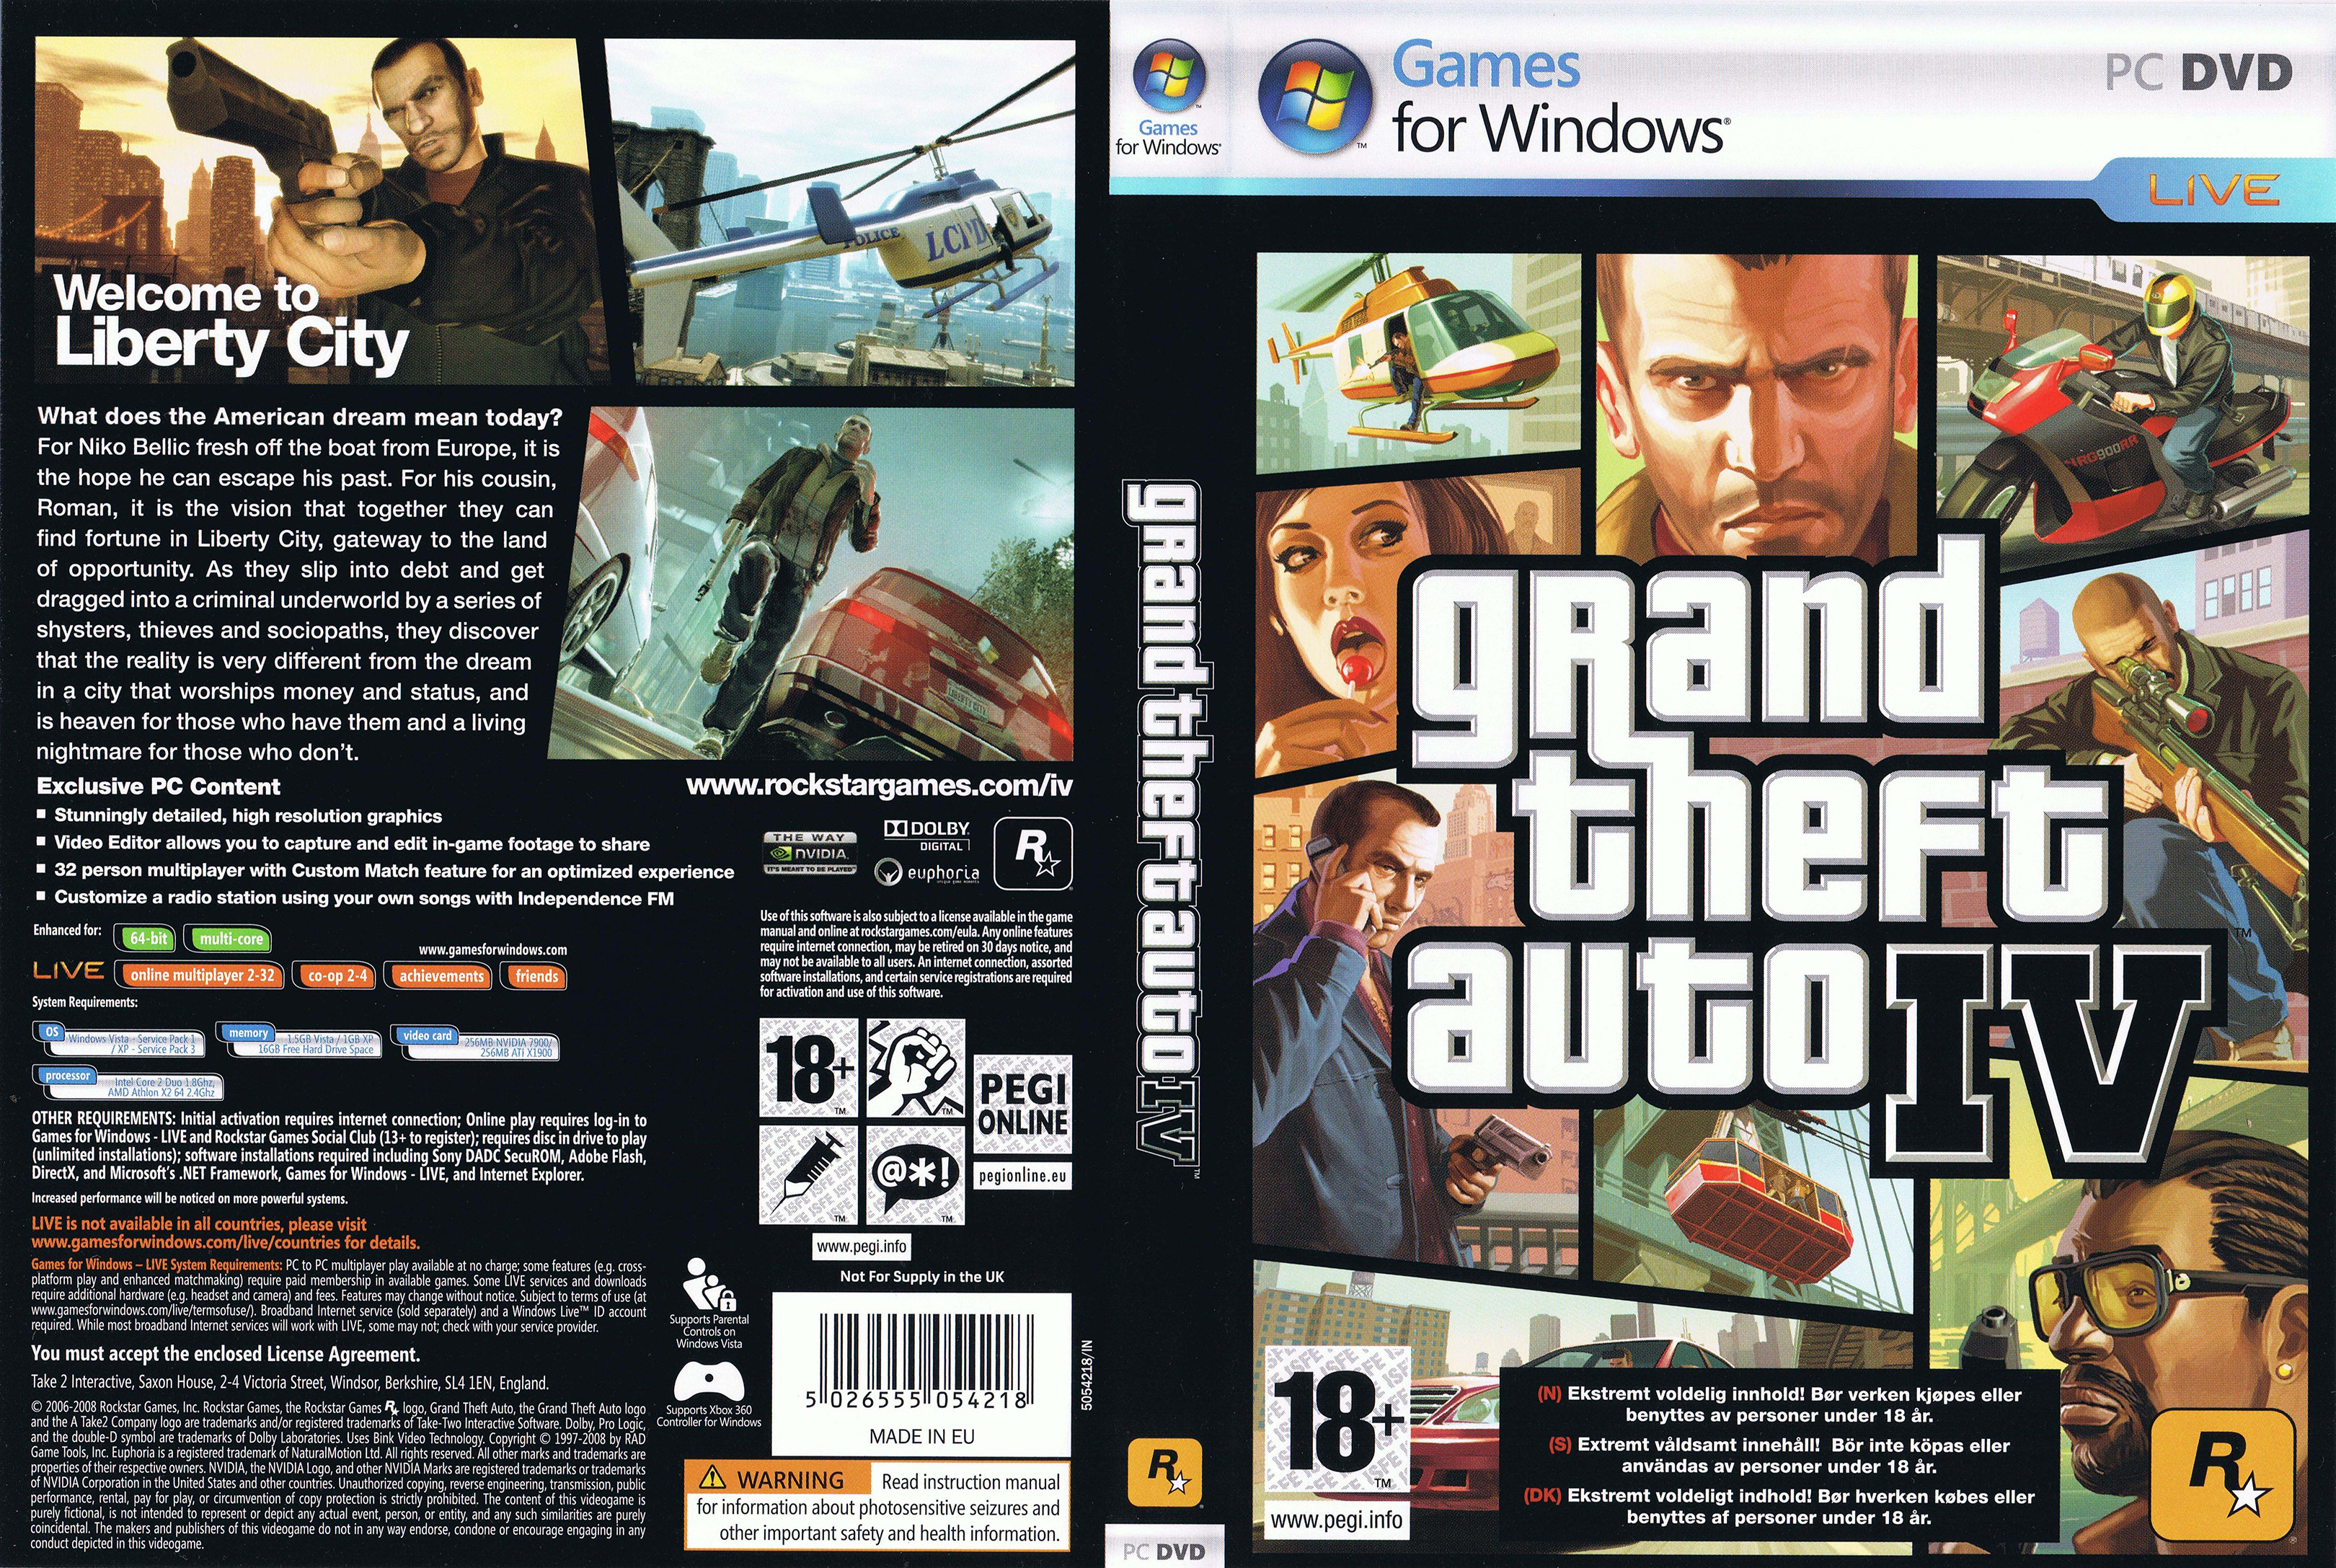 Gta Free Download For Pc Online